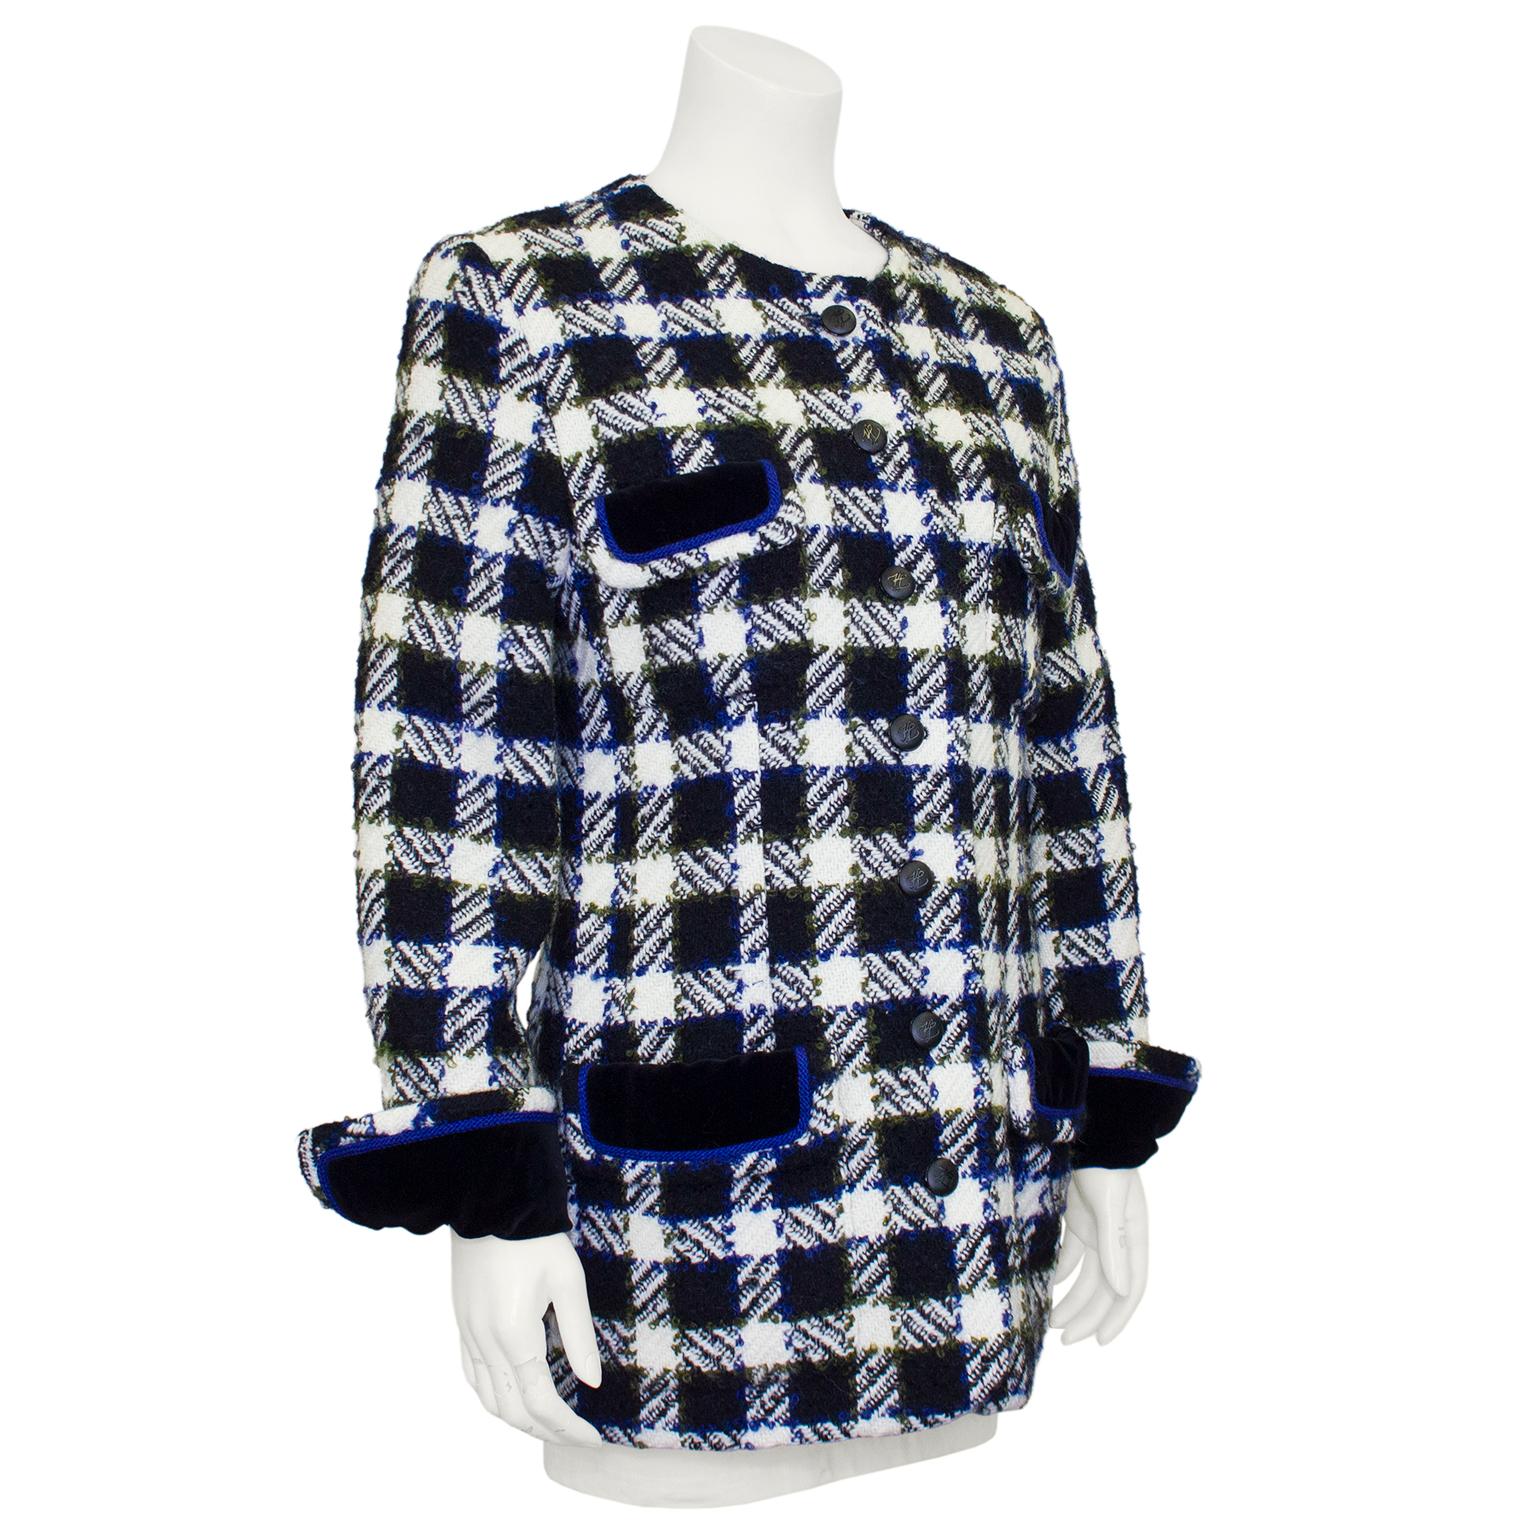 Perfect for fall and winter Karl Lagerfeld jacket from the 1980s. Thick wool black and cream houndstooth with olive green and royal blue looped yarn throughout adding colour and texture. Collarless with round black plastic buttons engraved with KL.